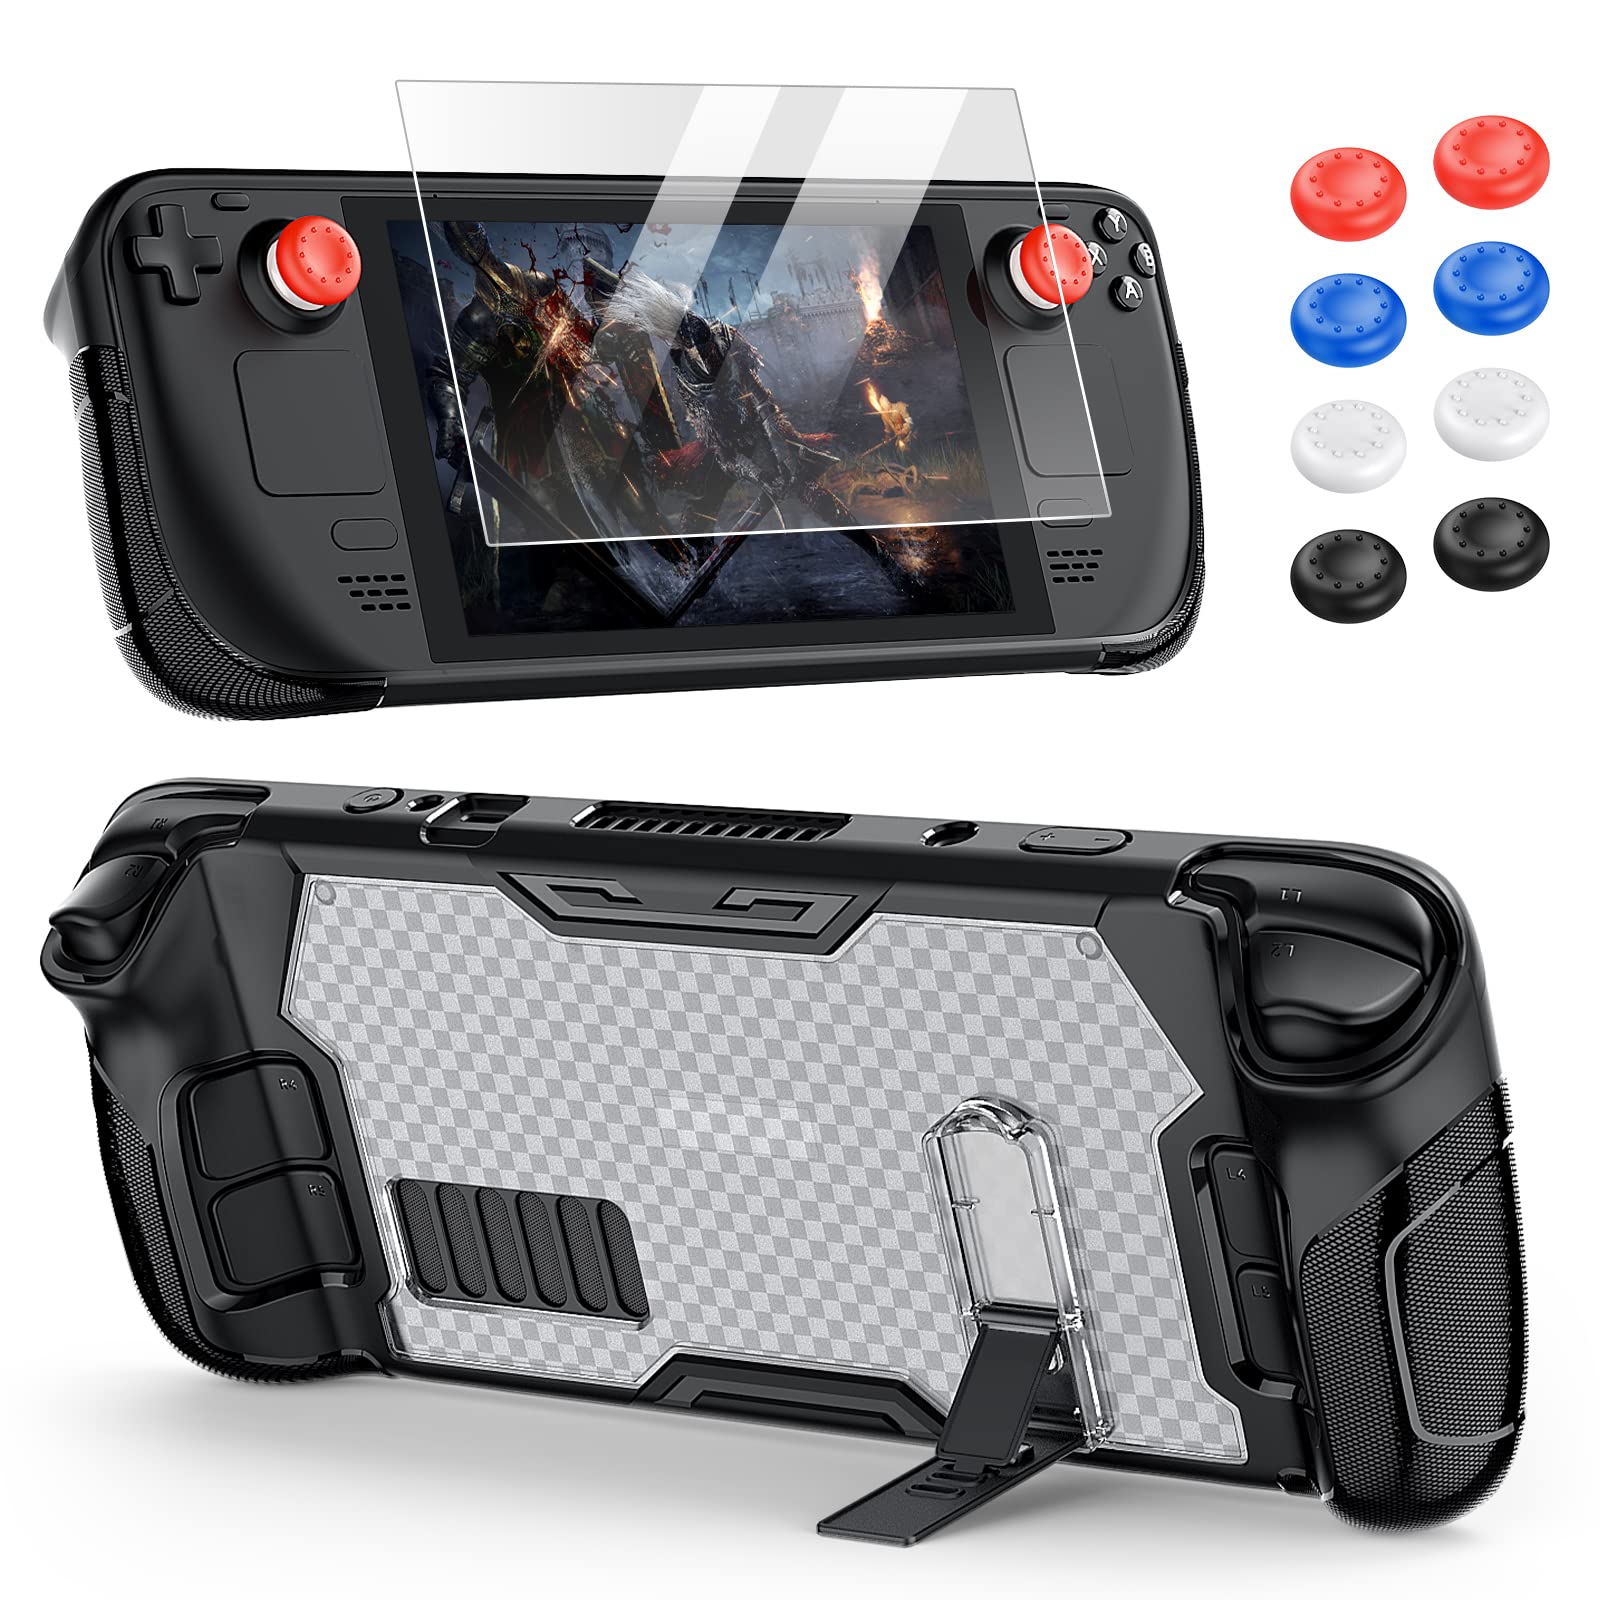 Upgraded Protective Case with Kickstand for Steam Deck, PC+TPU Protector Cover Case for Steam Deck Accessories Kits with Kick Stand, Screen Protector & Thumb Caps, Flexible Case for Steam Deck-Black